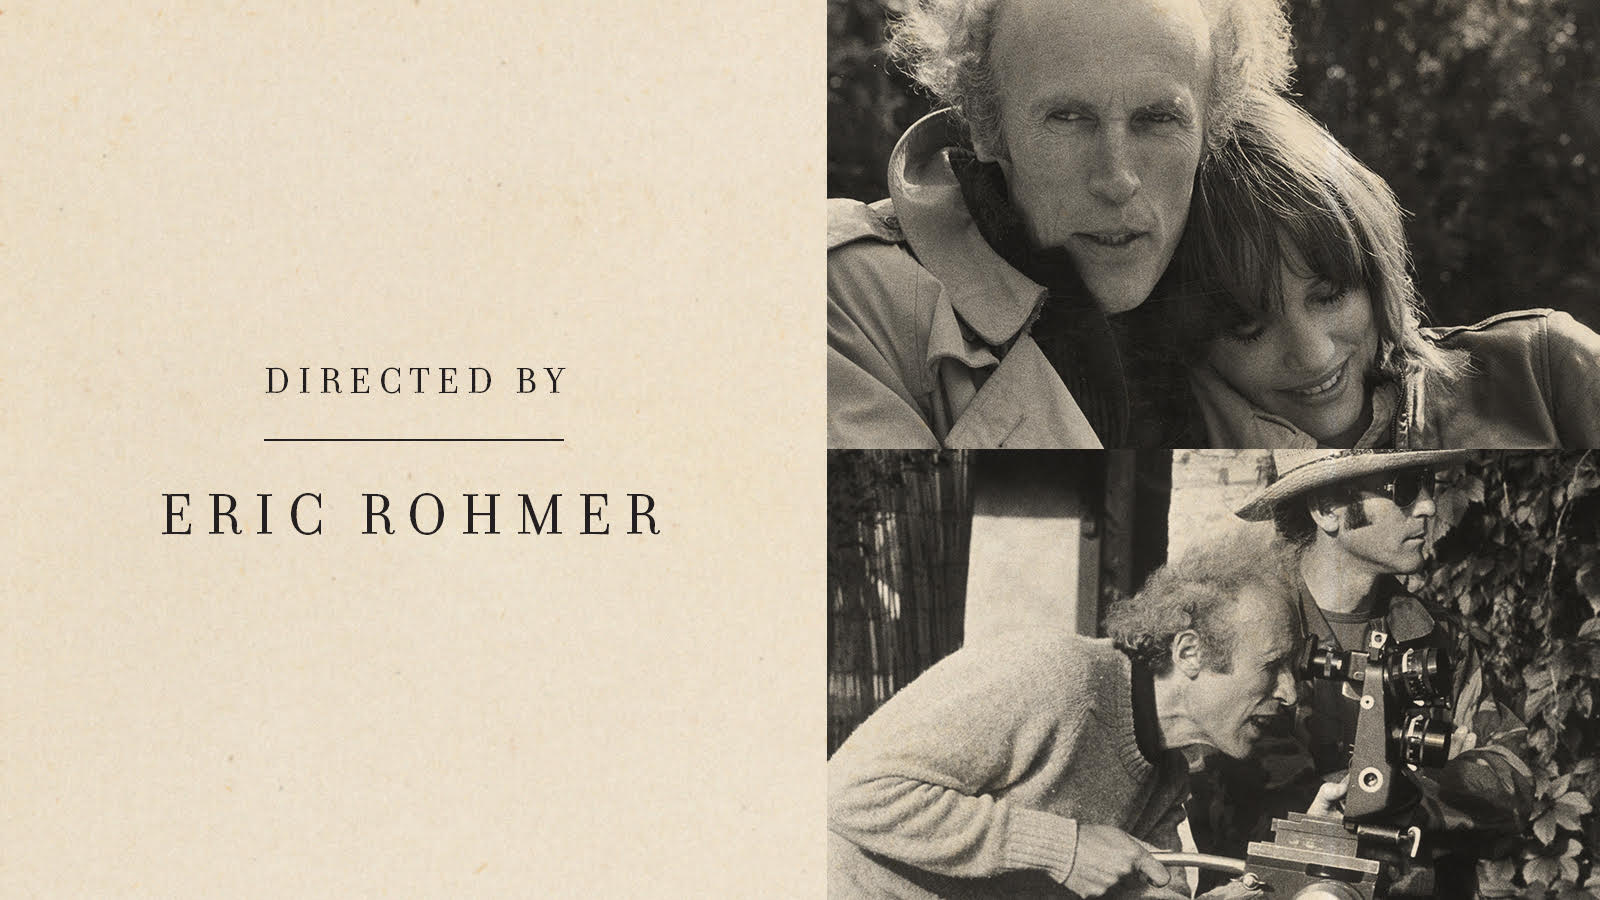 Directed by Eric Rohmer - The Criterion Channel